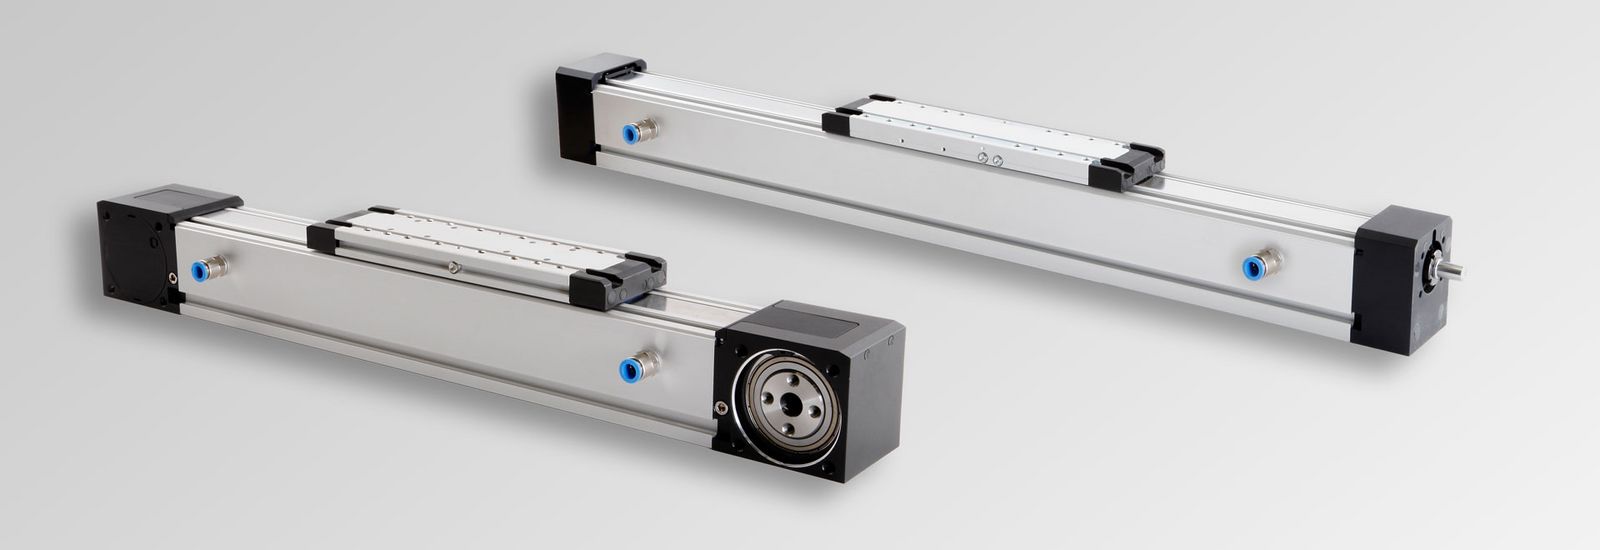 RK DuoLine Clean linear actuator for cleanroom applications